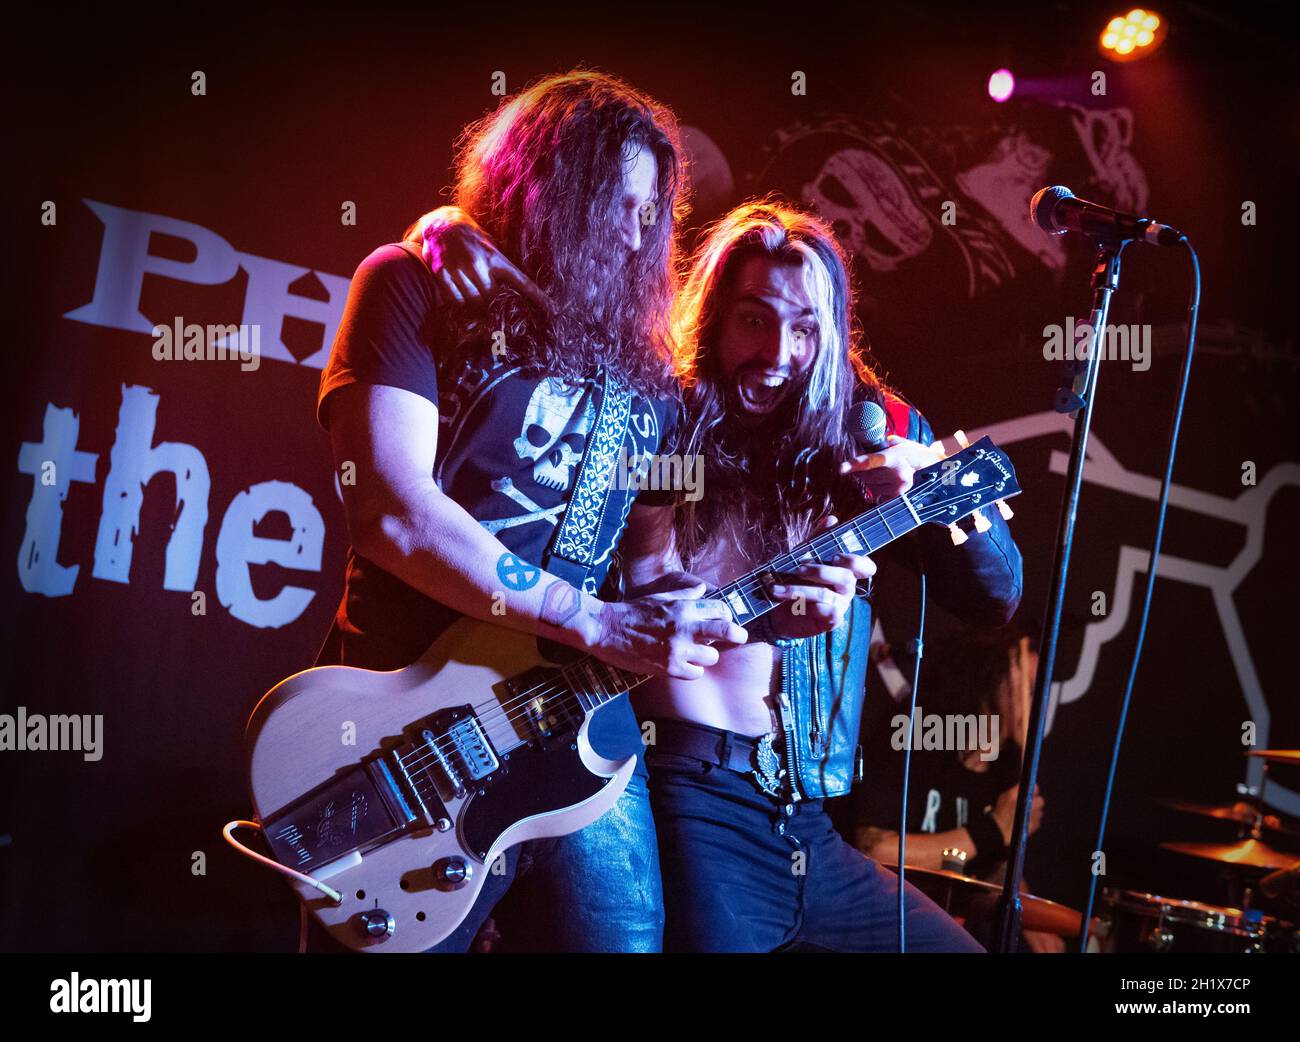 Phil X & The Drills (with Angelo Tristan of UK rock band Collateral, support band, joining for a song) live in concert at Birmingham O2 Academy 3, UK, March 12th, 2020. Live music photography. Stock Photo